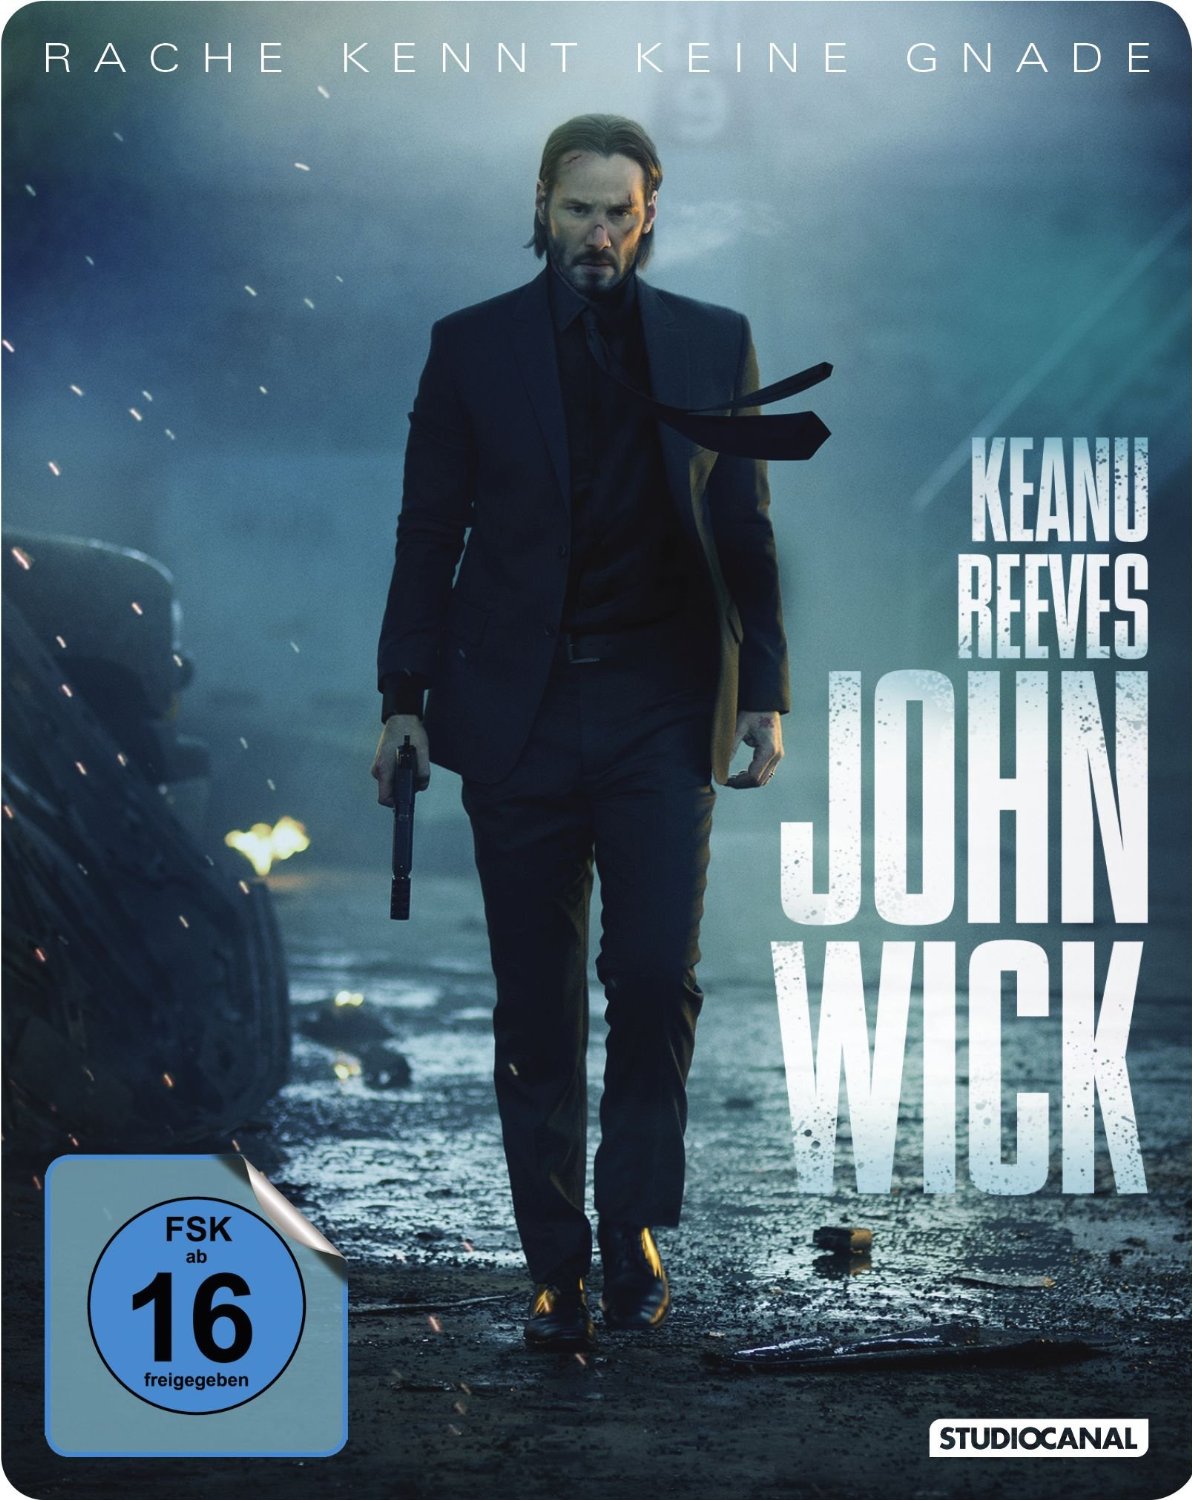 Modern action classic "John Wick" is getting a German ...